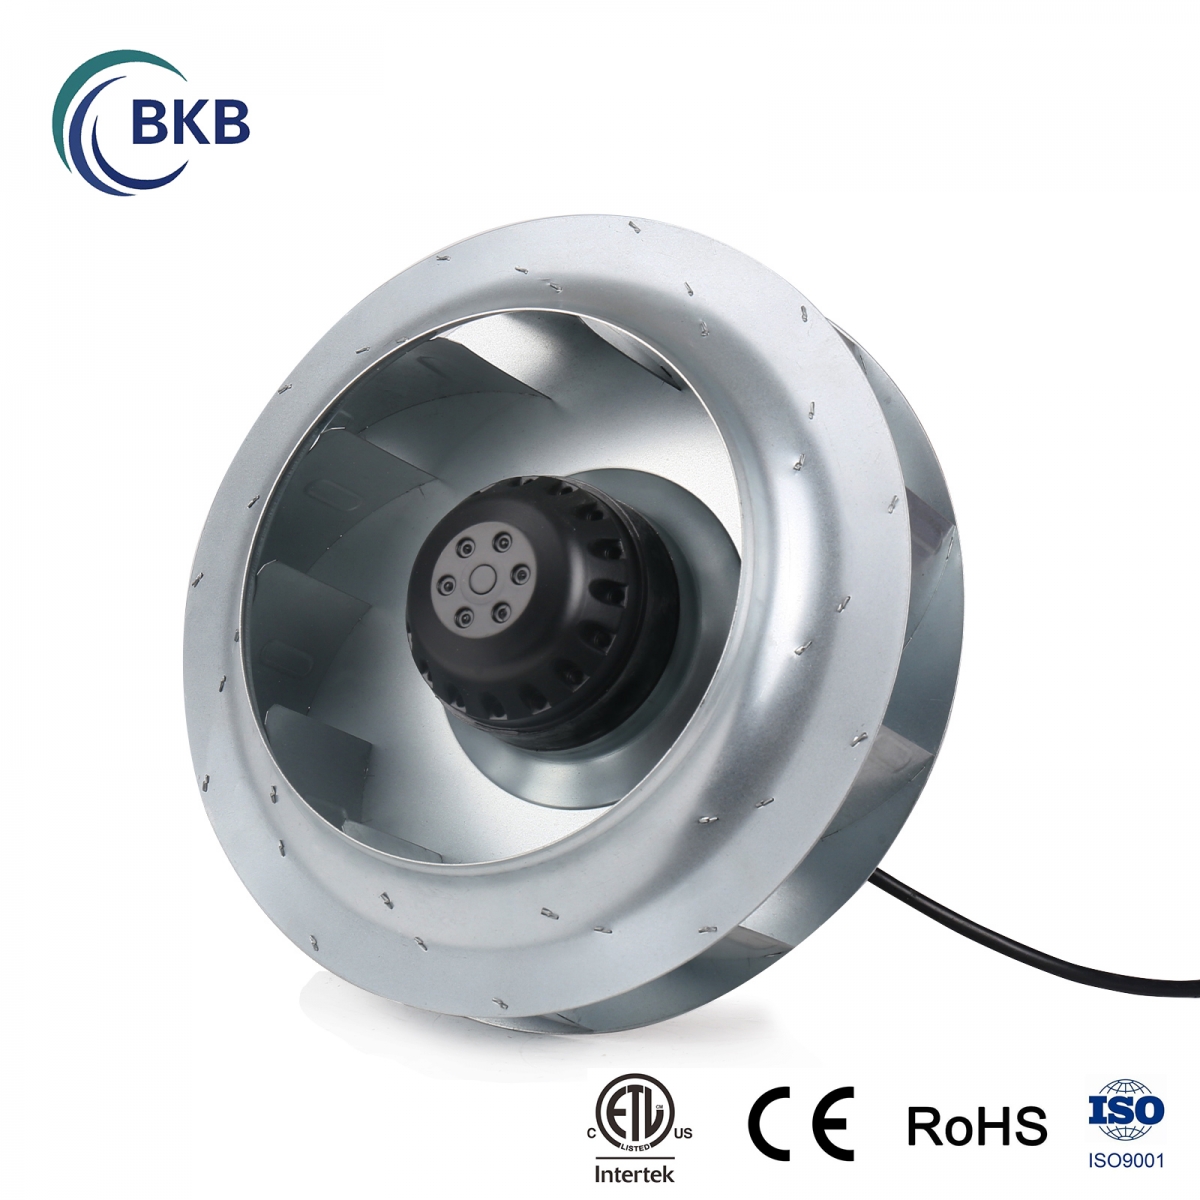 Strengthen the energy saving and consumption reduction of centrifugal fan-SUNLIGHT BLOWER,Centrifugal Fans, Inline Fans,Motors,Backward curved centrifugal fans ,Forward curved centrifugal fans ,inlet fans, EC fans